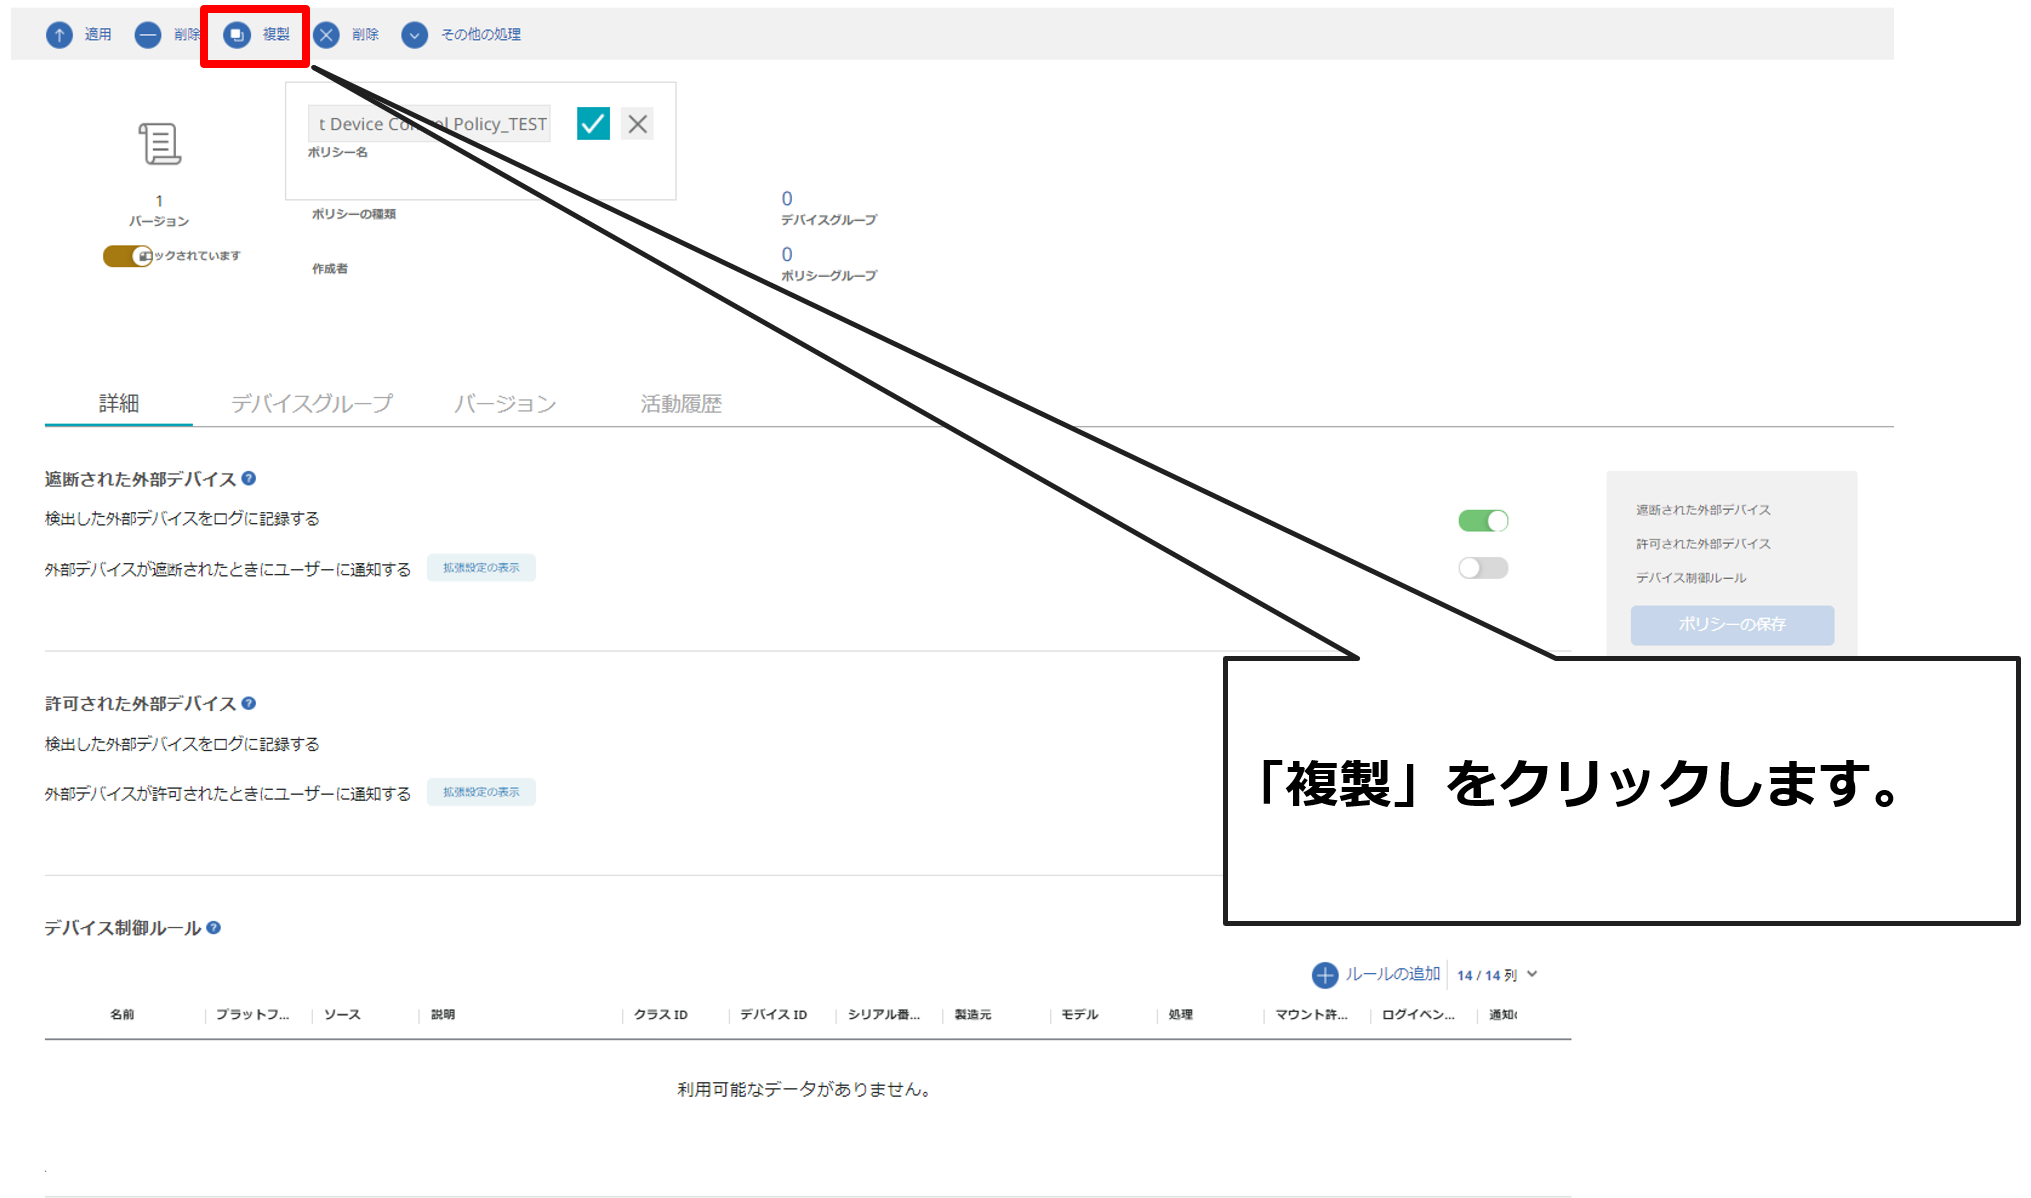 https://licensecounter.jp/engineer-voice/blog/uploads/f53644bf788504db4a8aa886faaa4034d20d040f.png